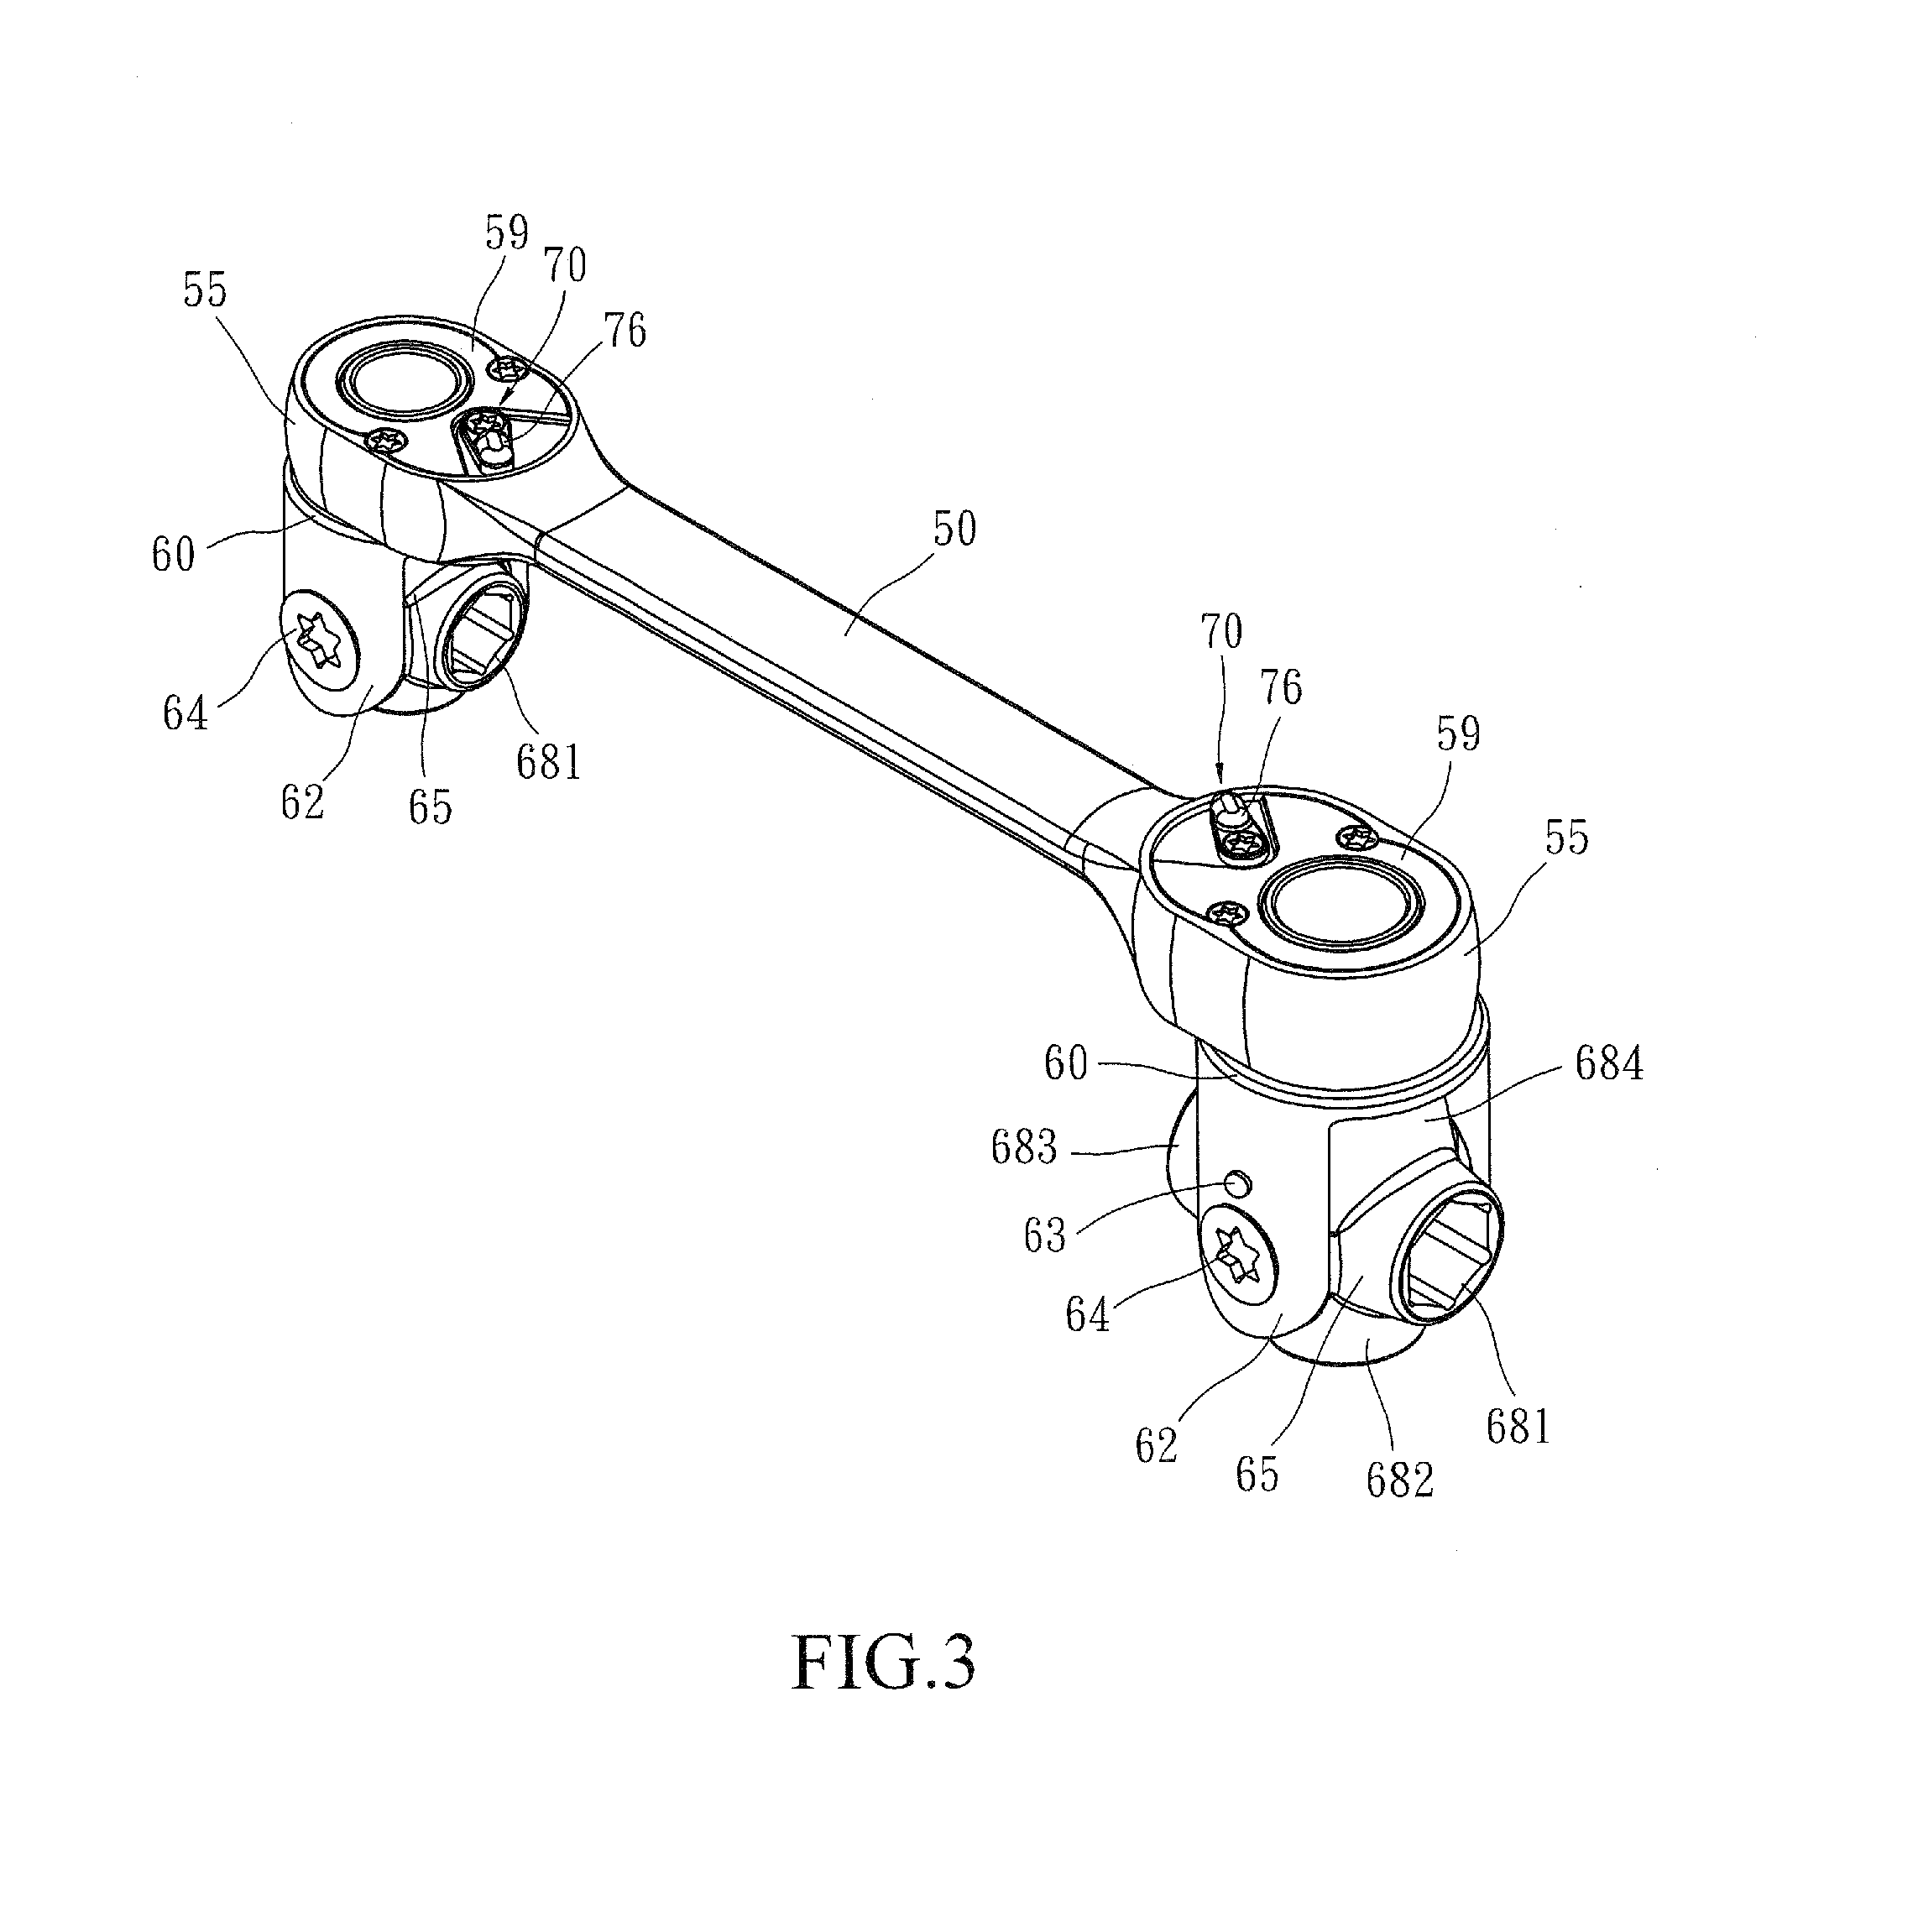 Ratchet wrench having rotatably attached sockets